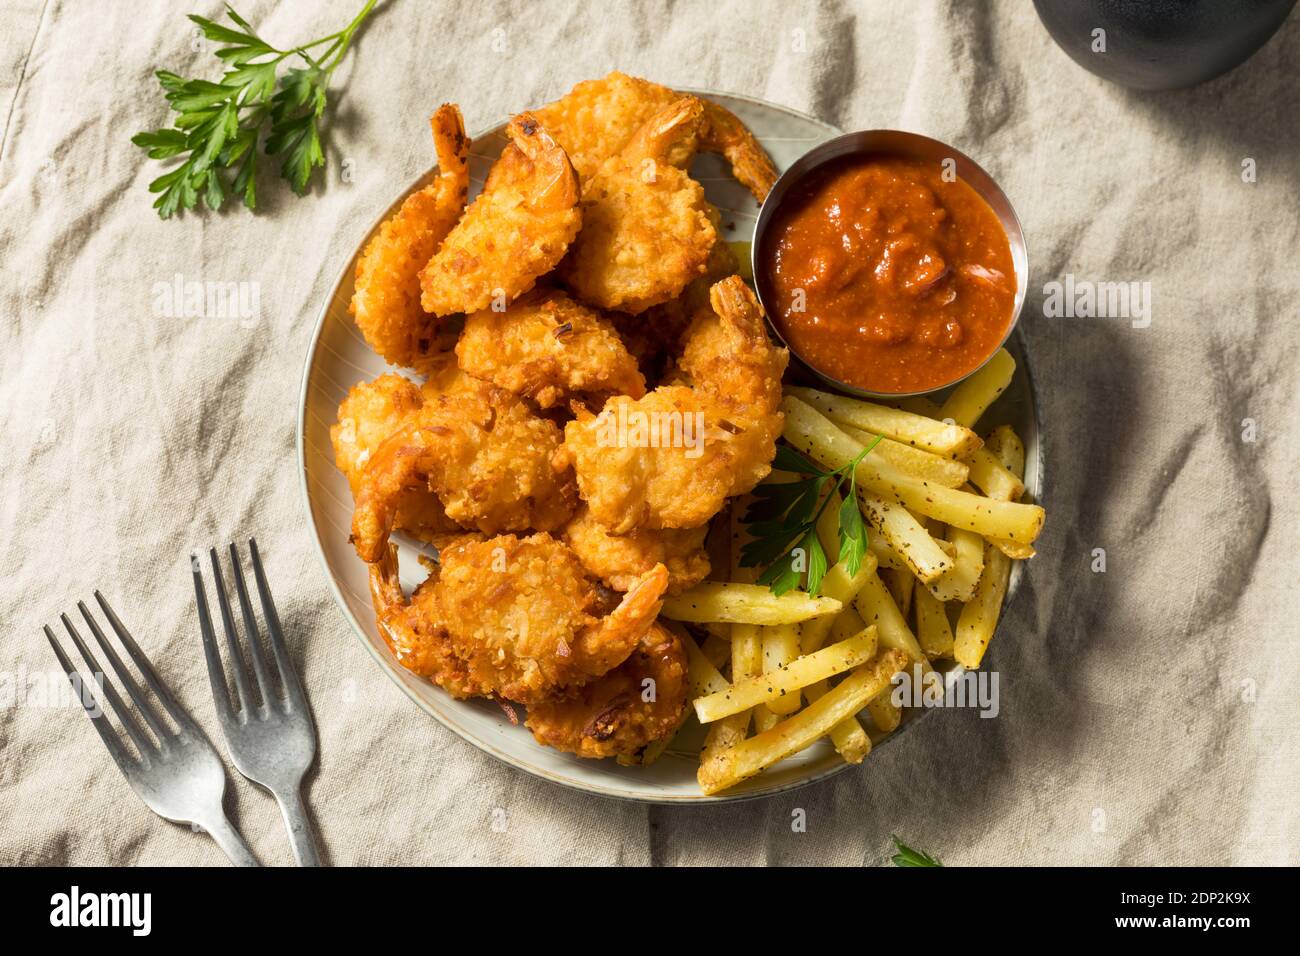 Homemade Deep Fried Coconut Shrimp with Fries and Cocktail Sauce Stock Photo